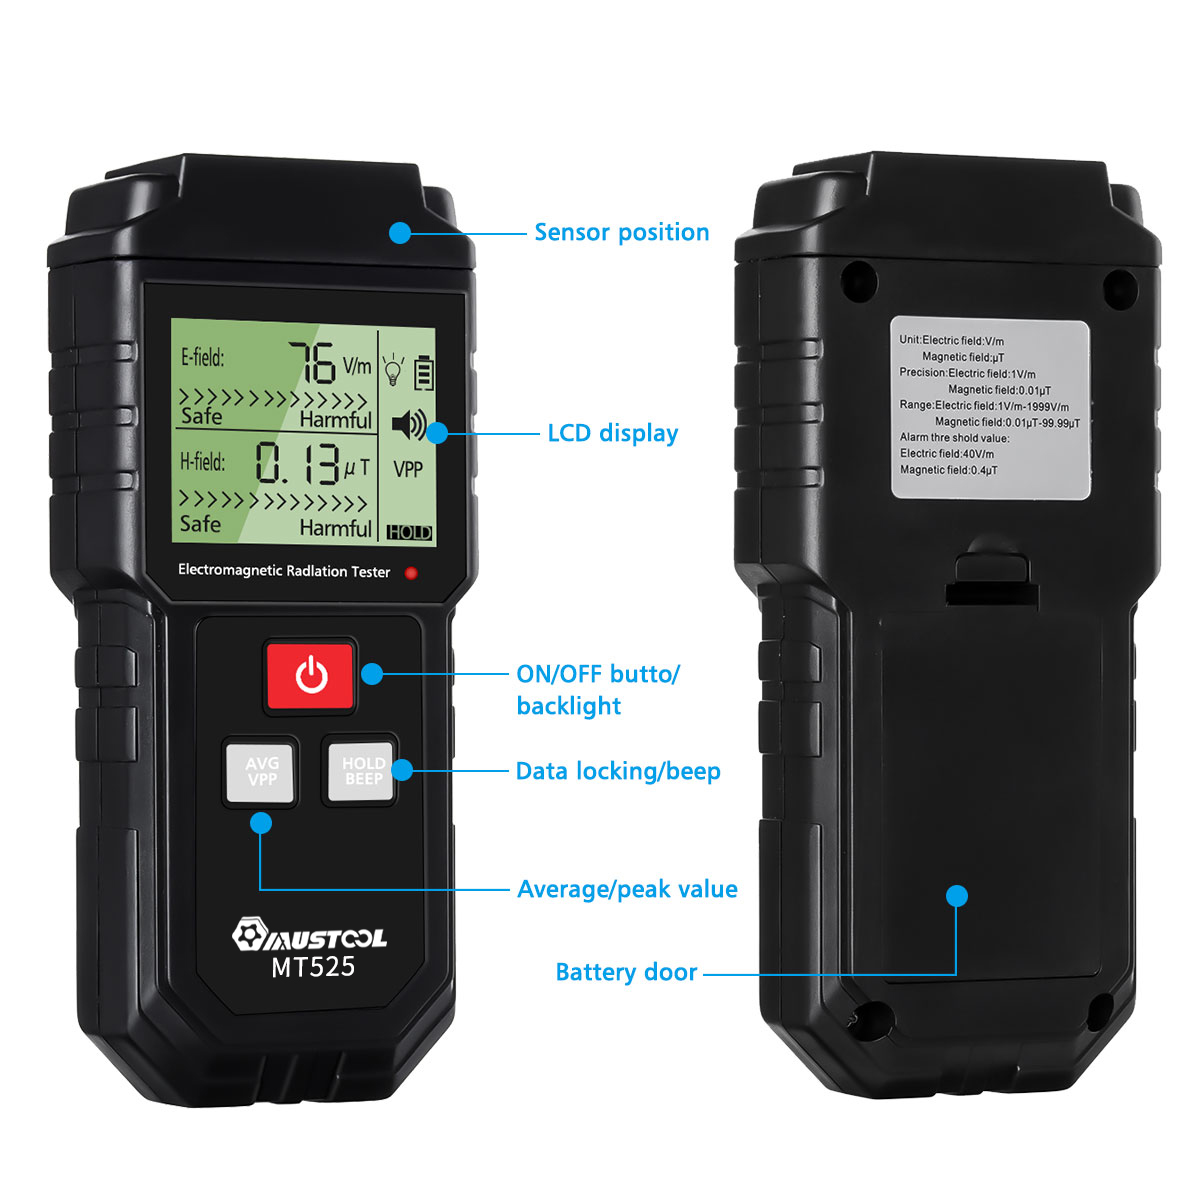 MUSTOOL MT525 Electromagnetic Radiation Tester Electric Field & Magnetic Field Dosimeter Tester Sound and Light Alarm 15